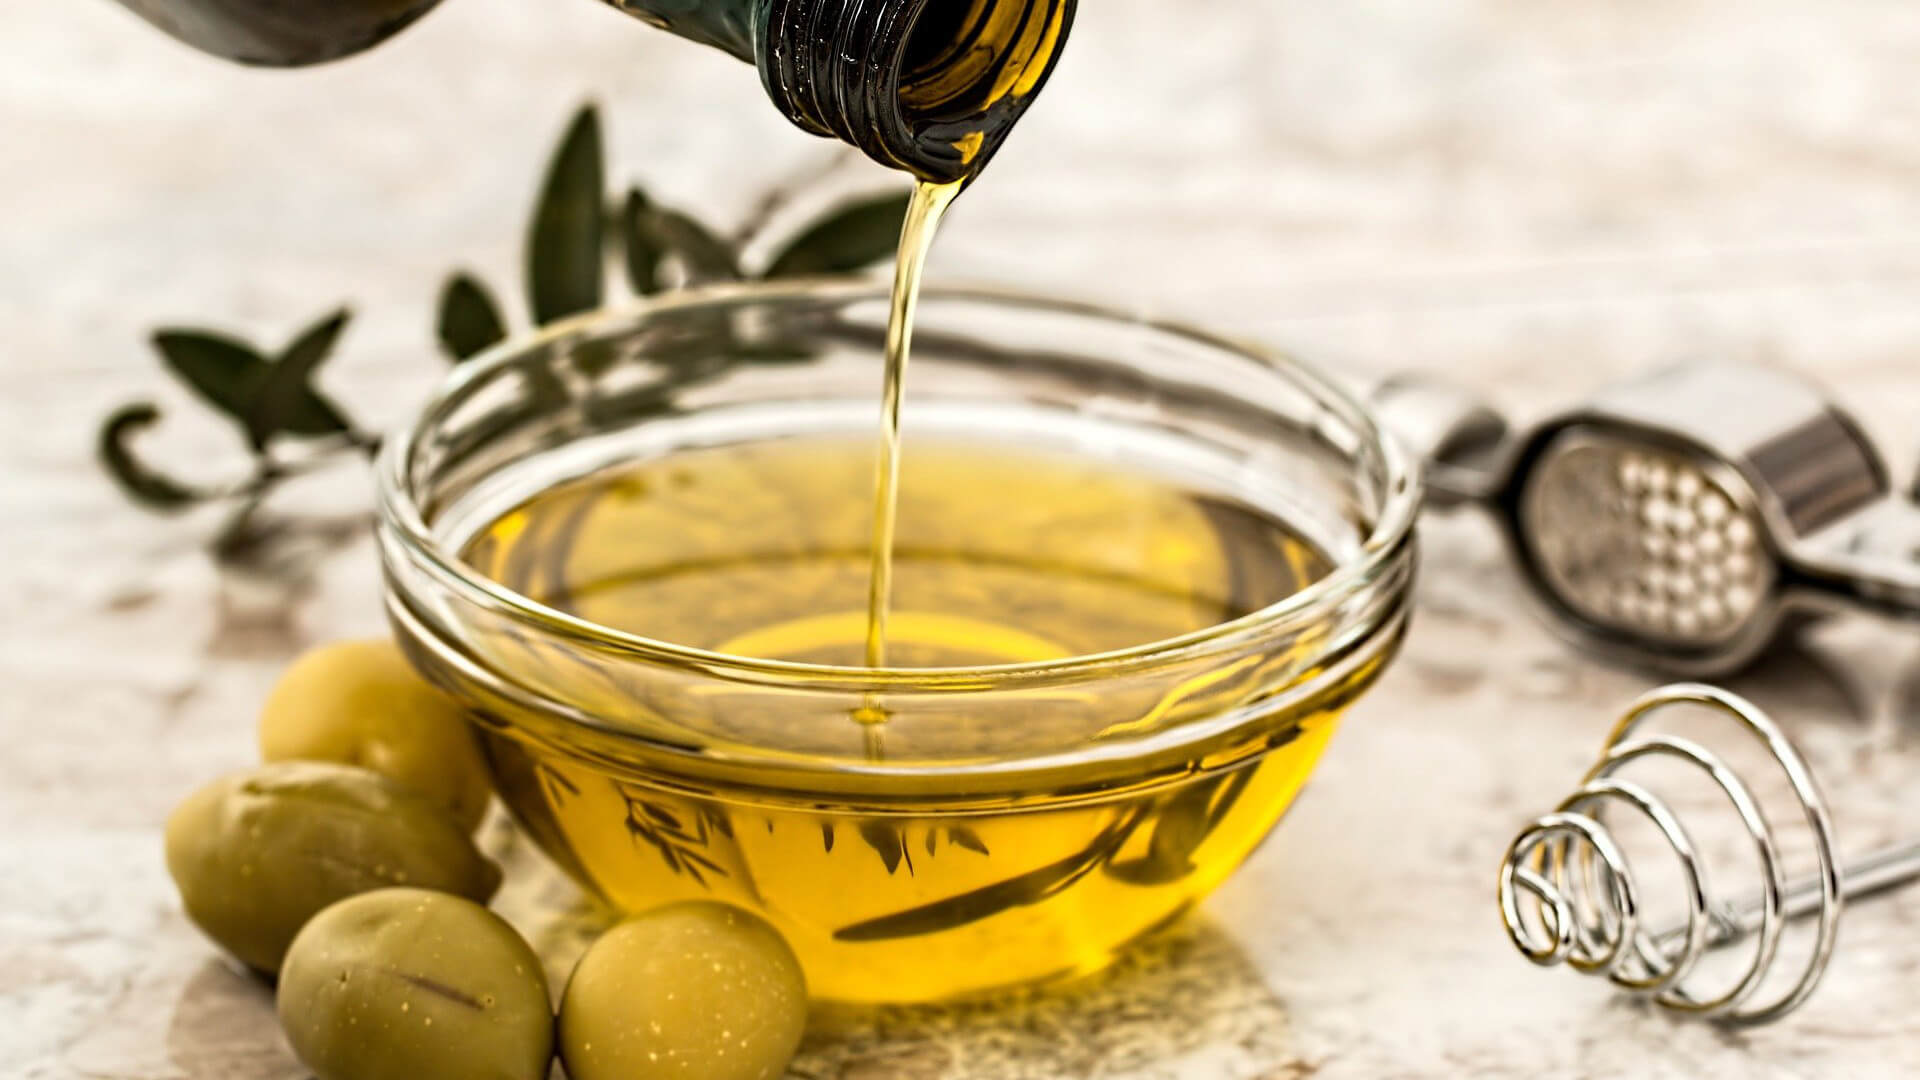 Olive oil image by Steve Buissinne from Pixabay